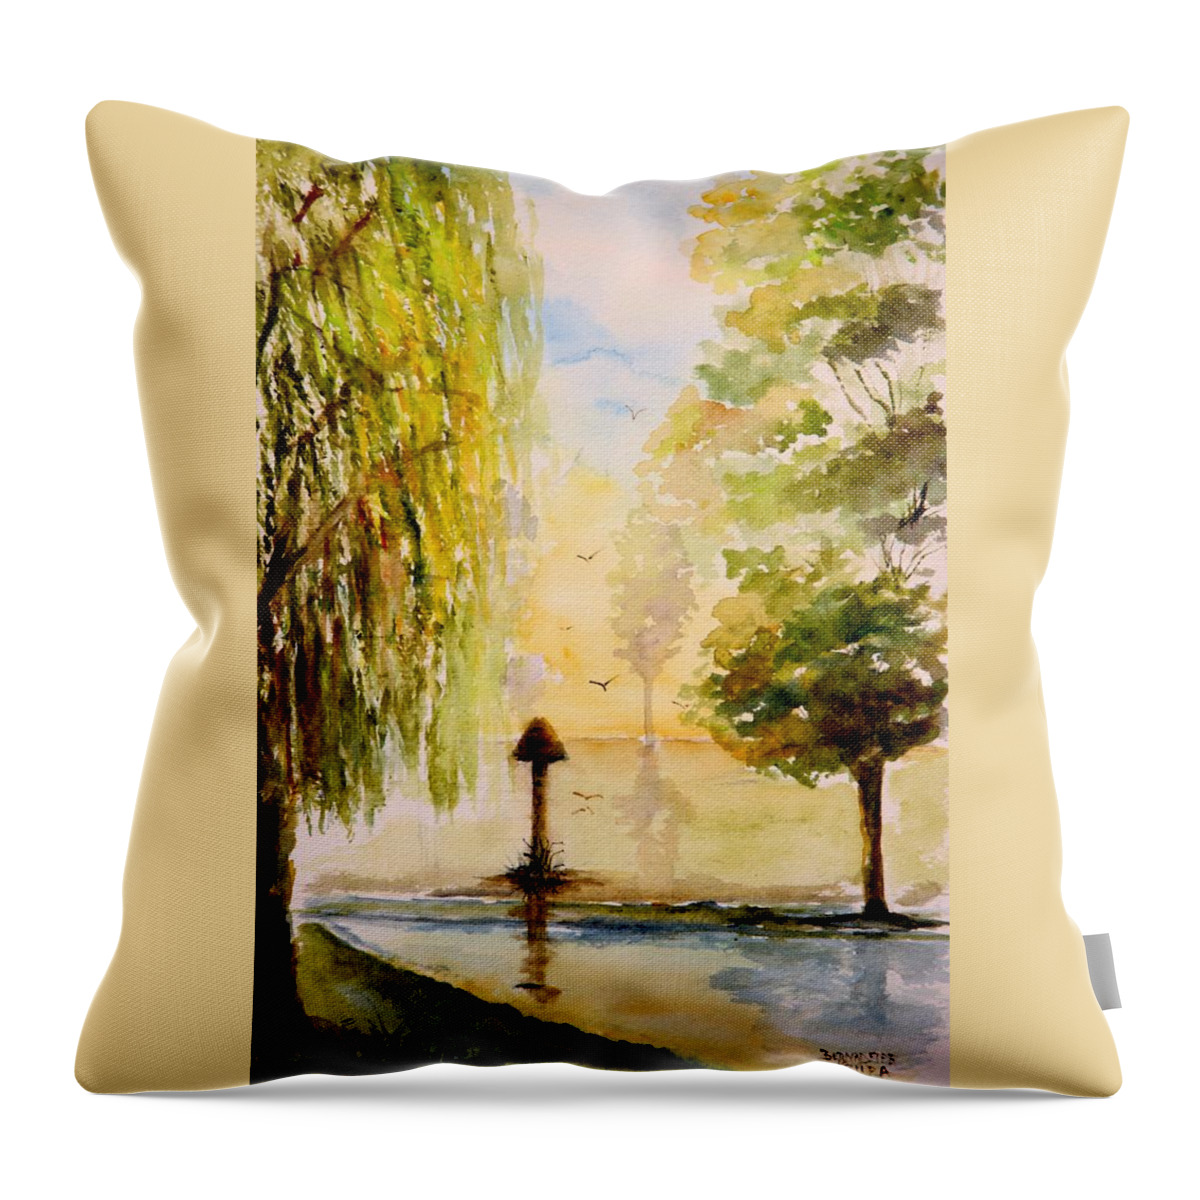 Thicket Throw Pillow featuring the painting The Thicket by Bernadette Krupa